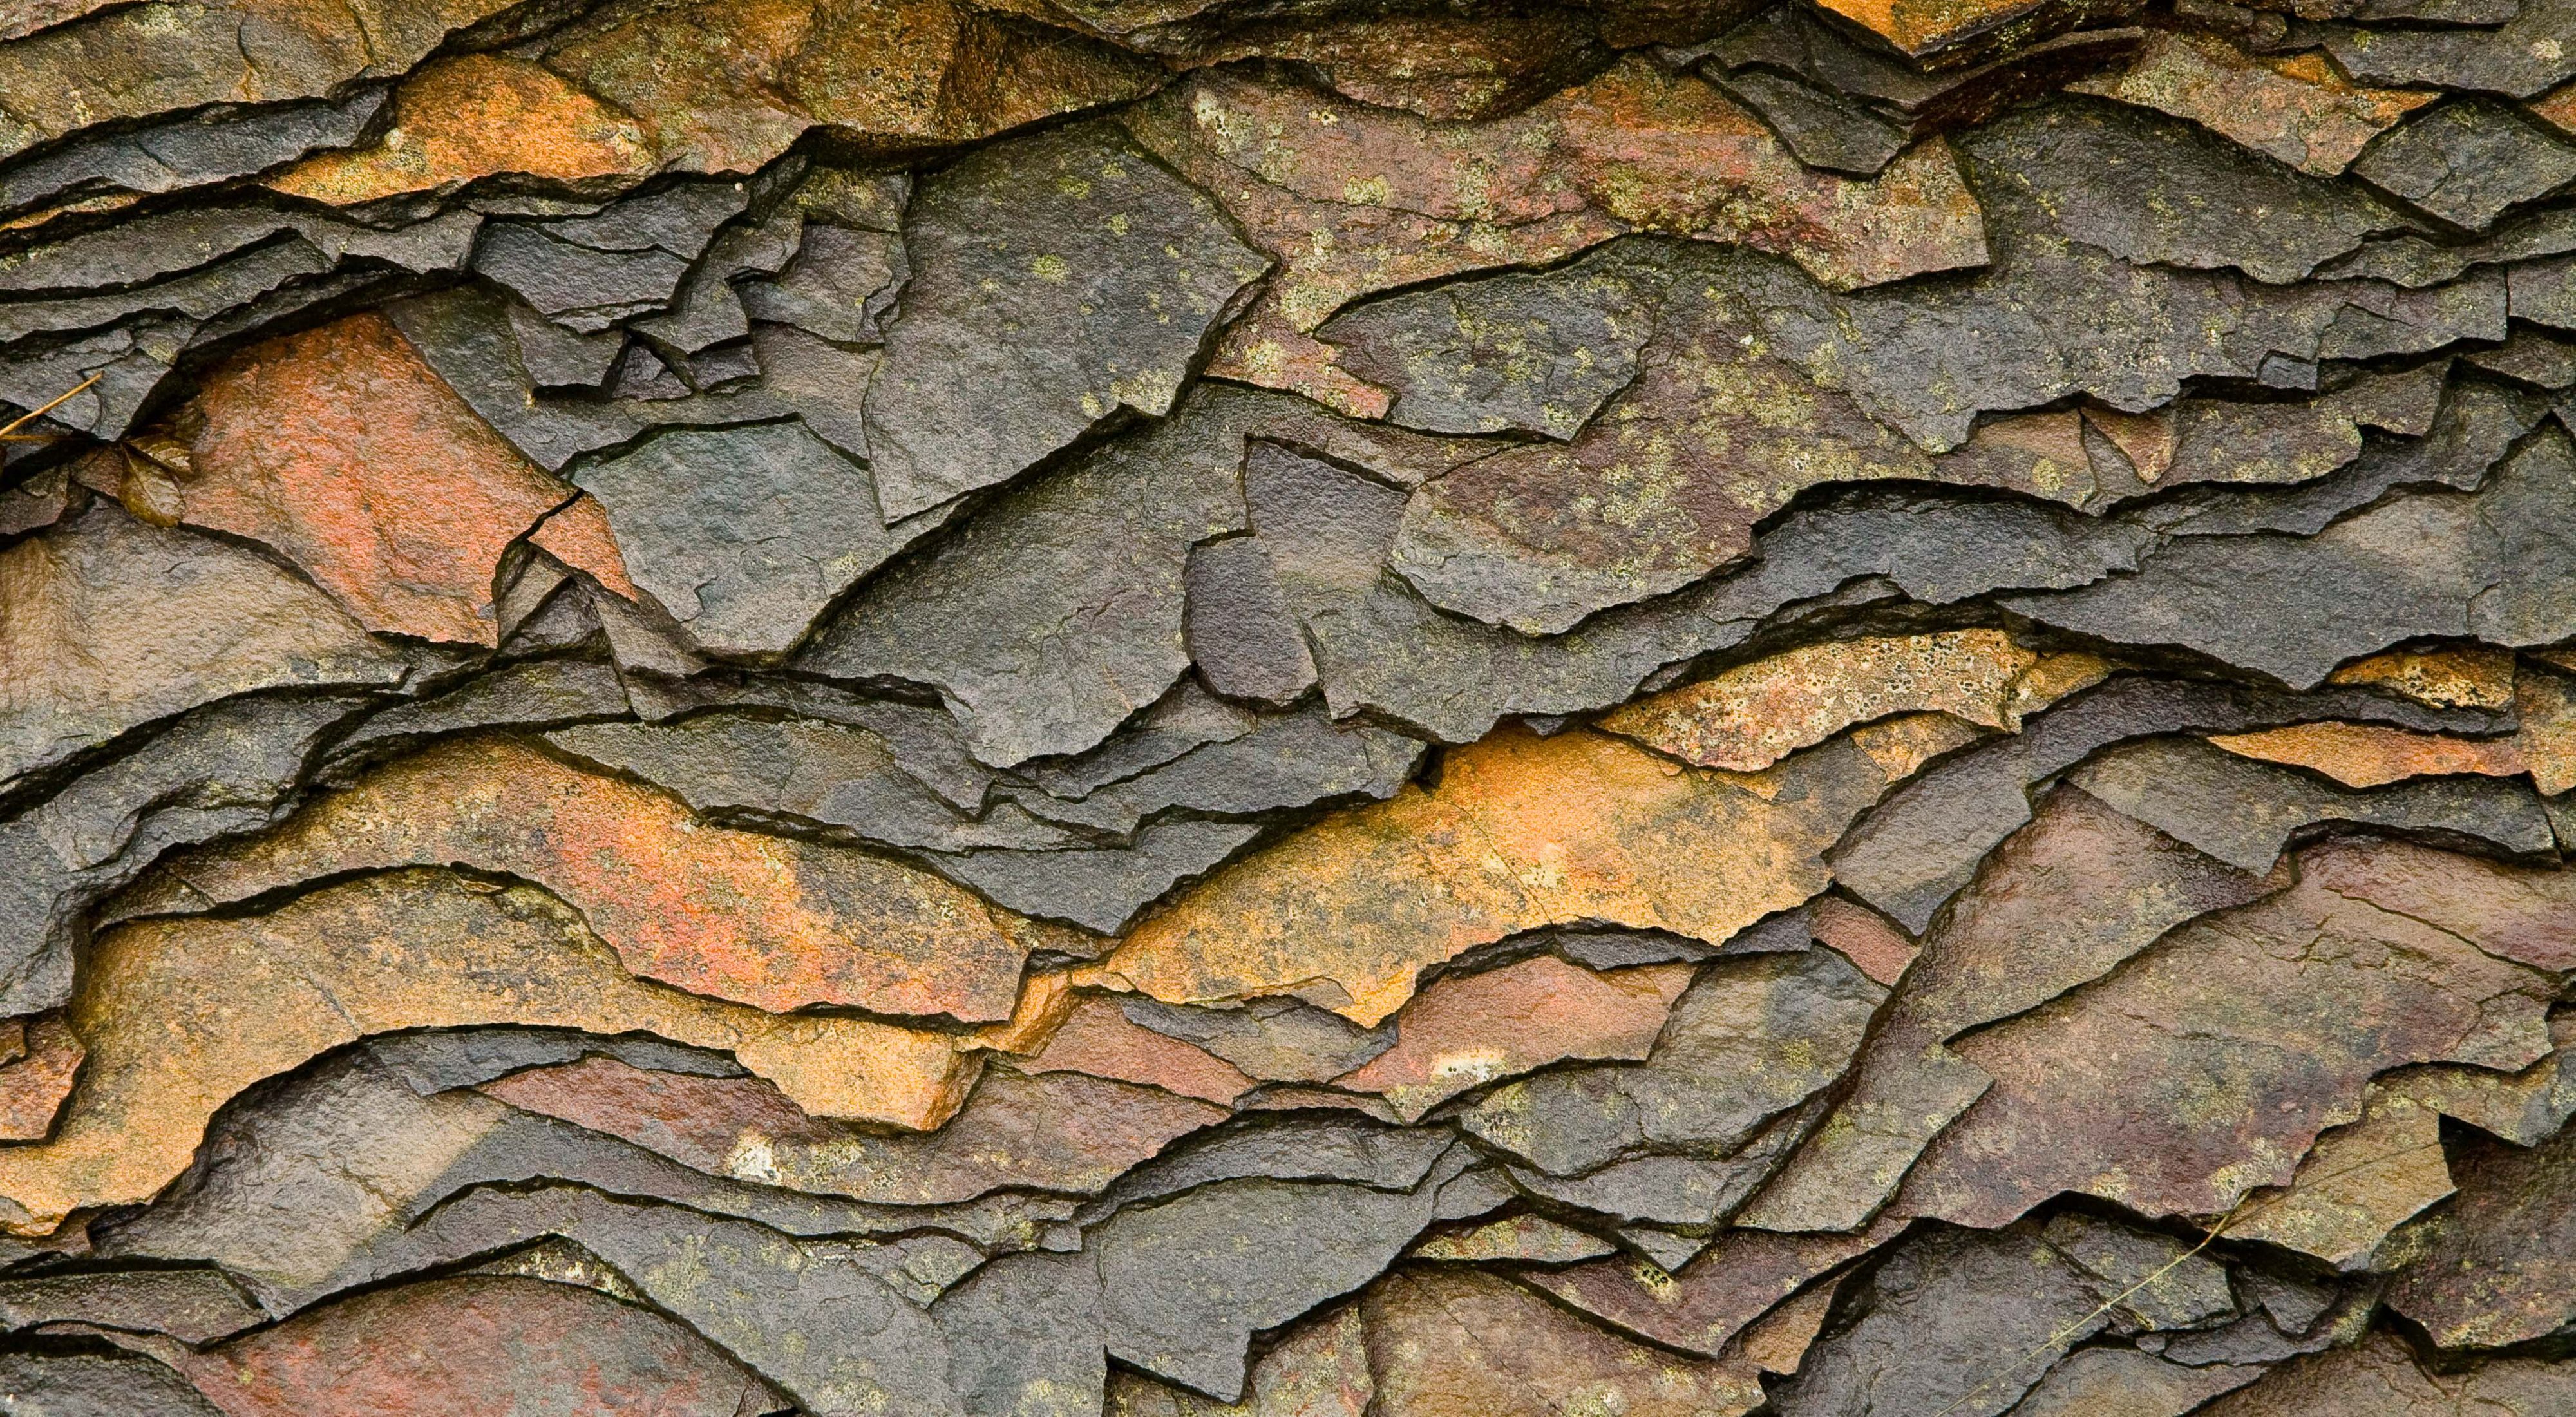 Layers of overlapping shale rock.